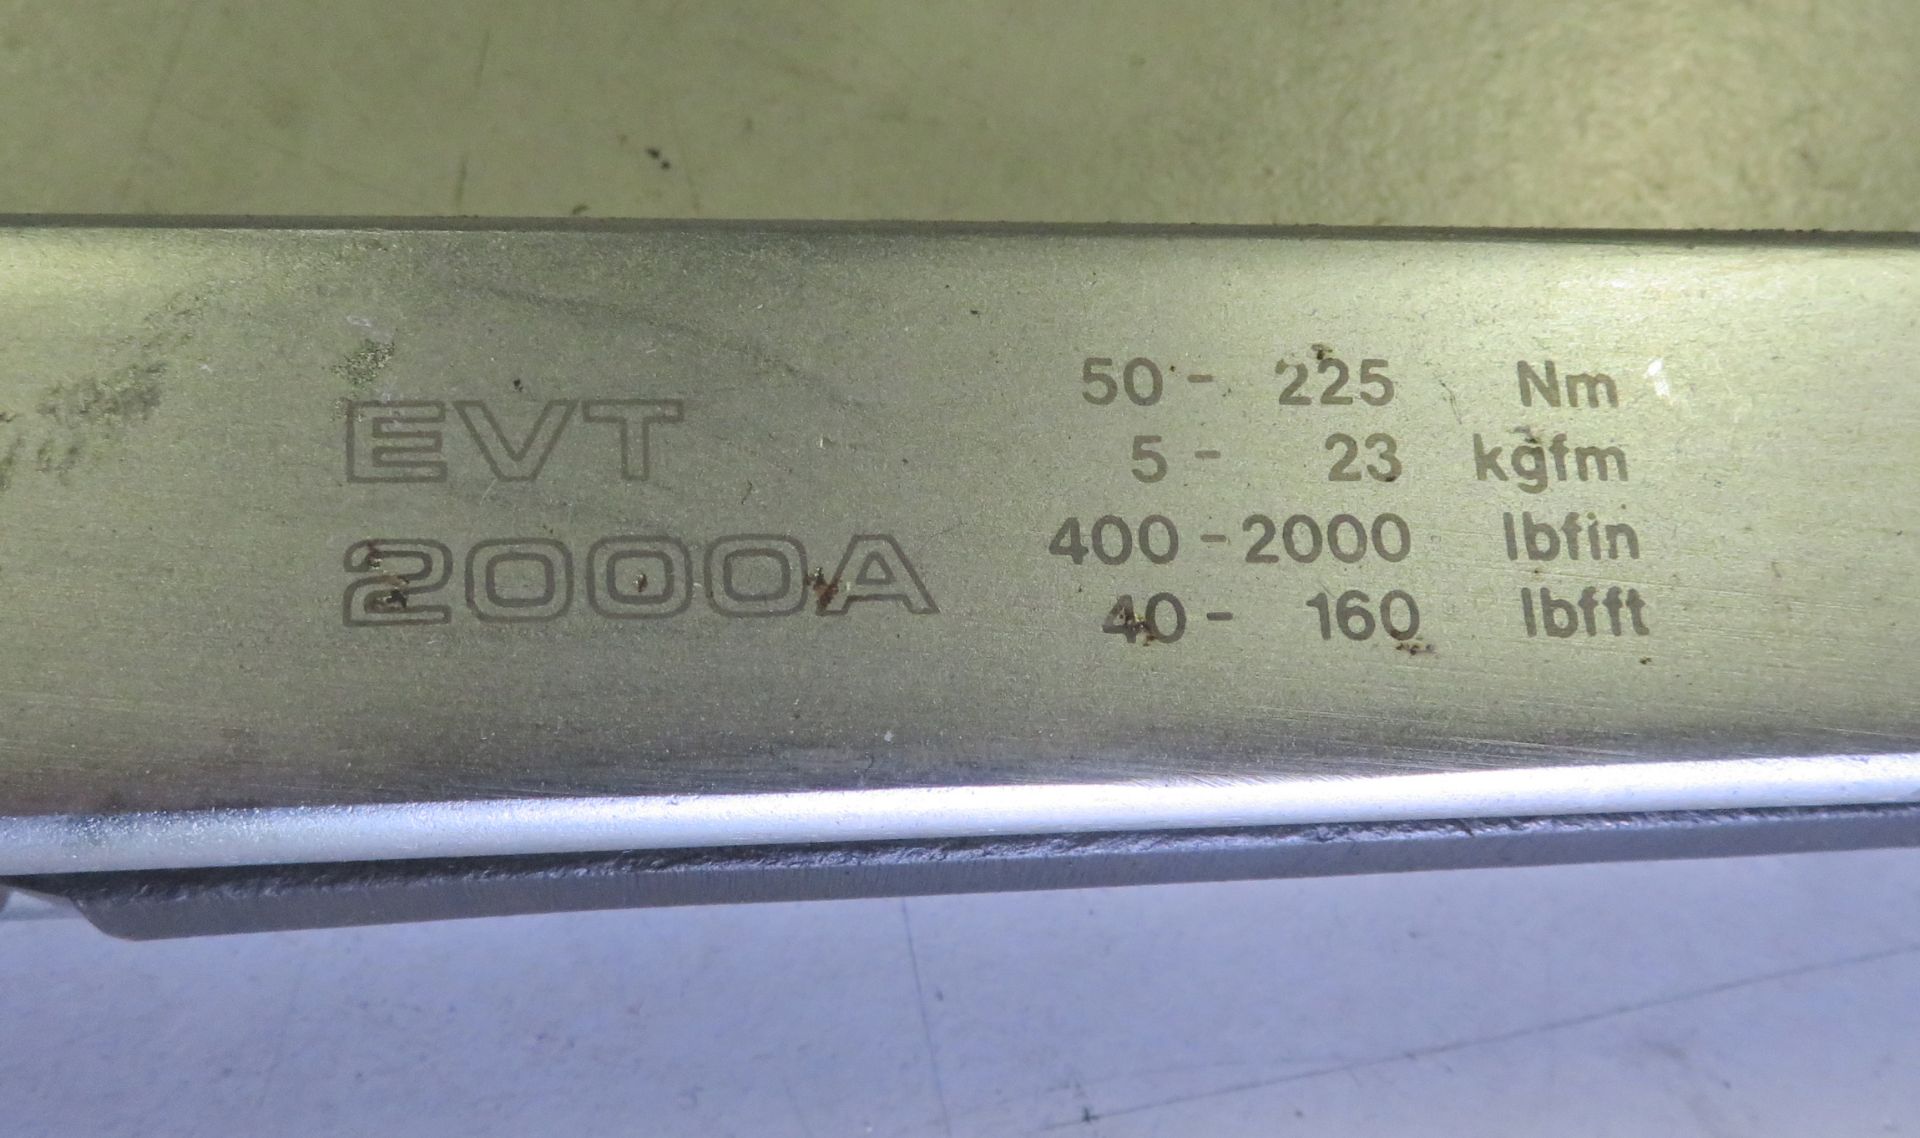 Britool EVT 20000A Torque Wrench 50-225 Nm - Image 2 of 2